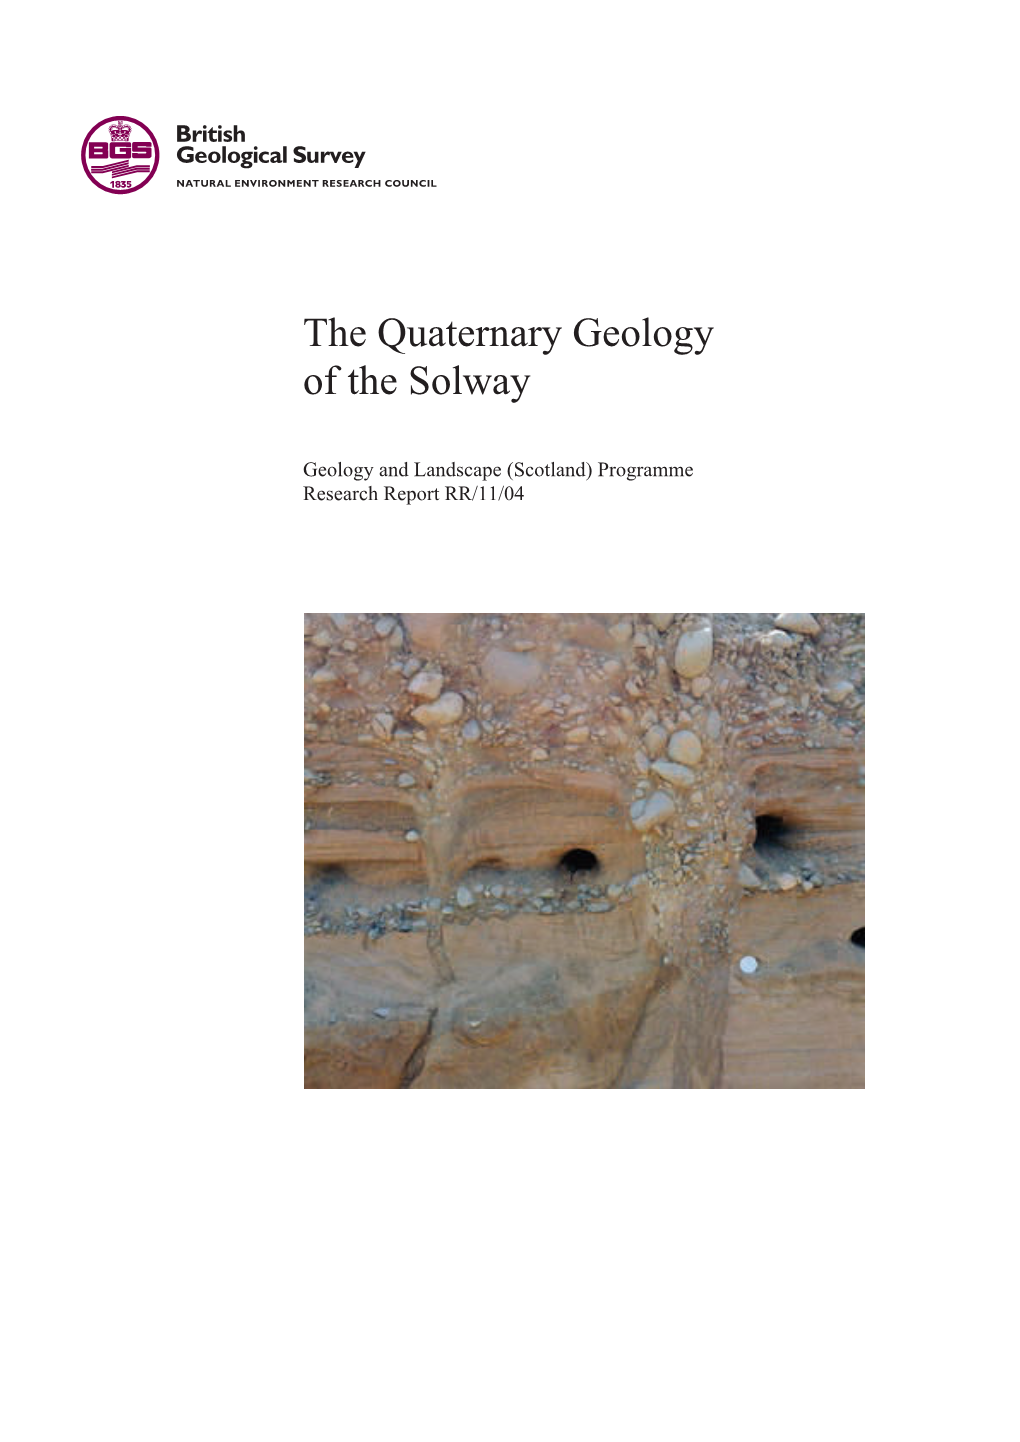 The Quaternary Geology of the Solway